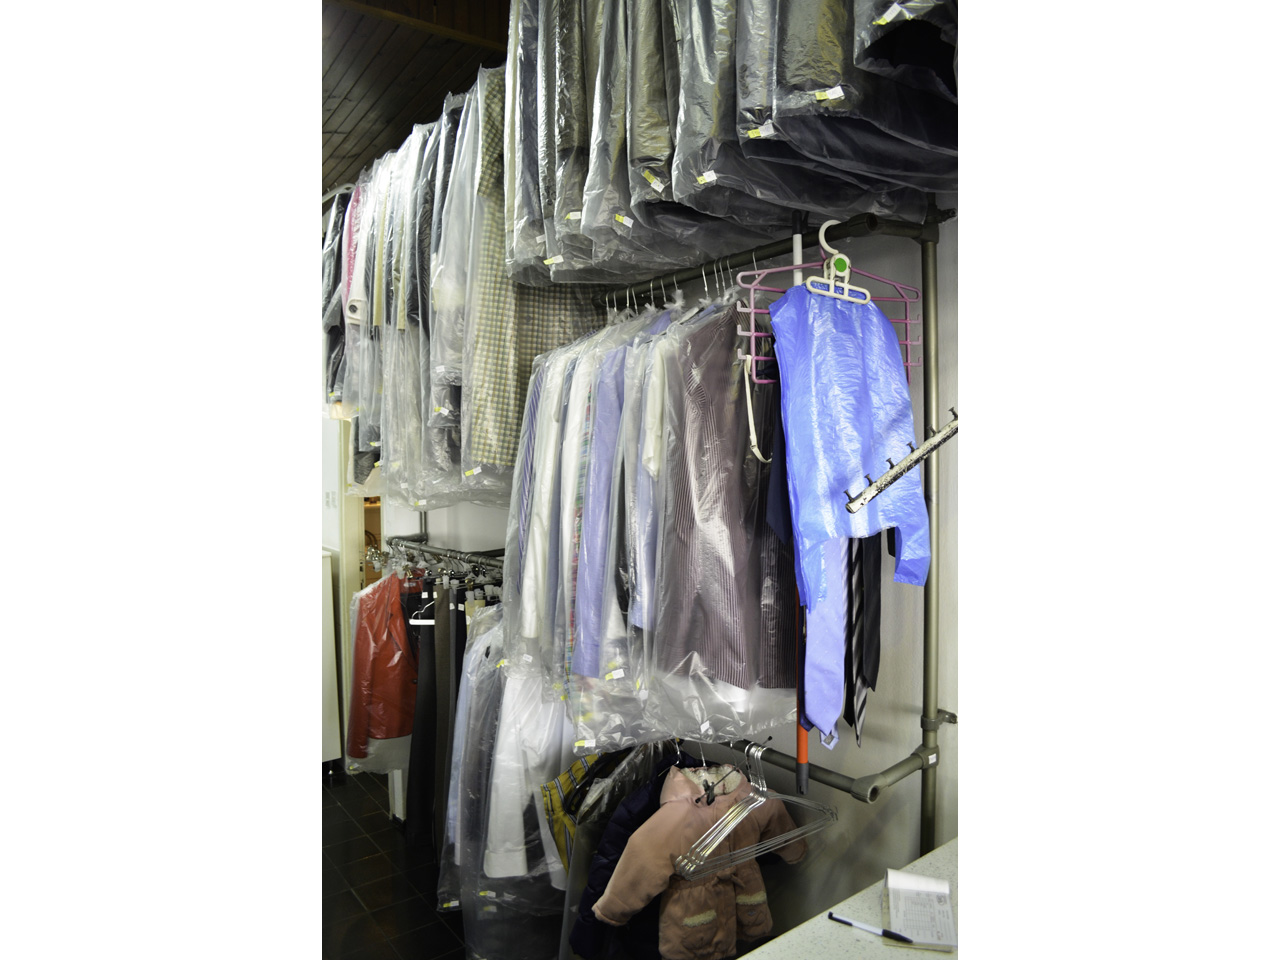 SAIS DRY CLEANING AND LAUNDRY WASH Laundries Beograd